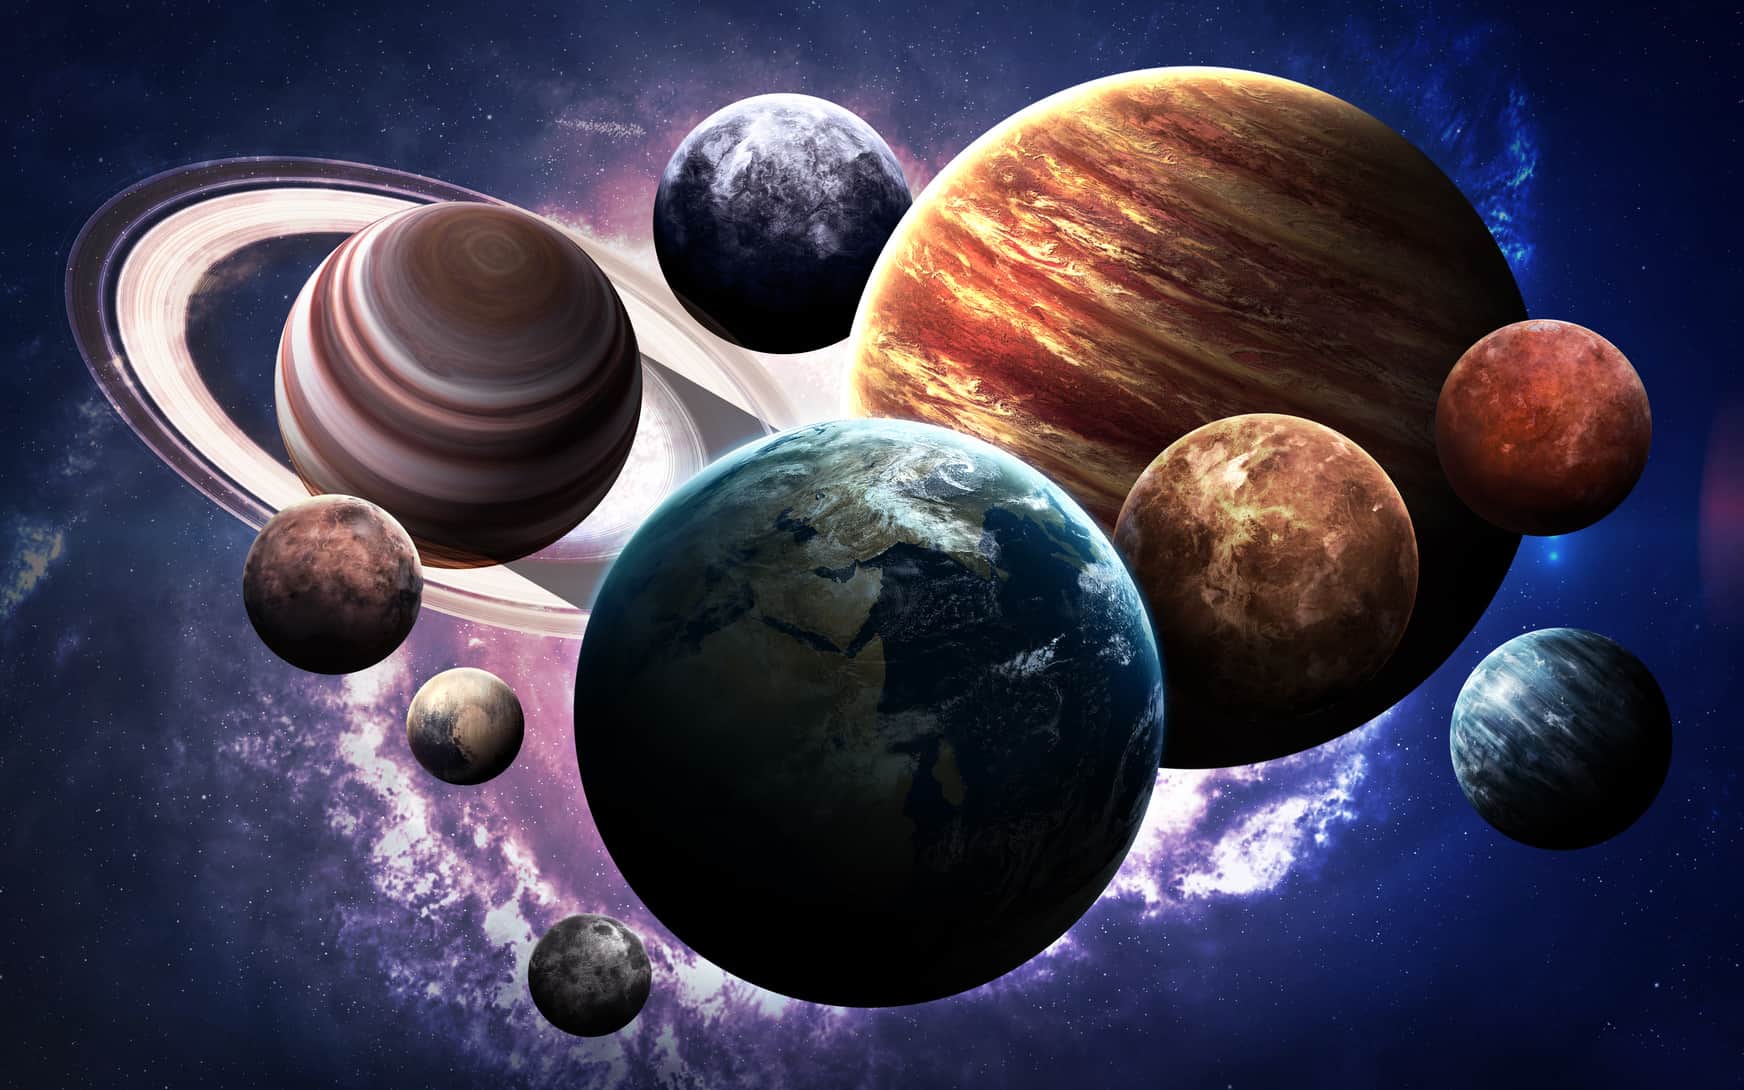 What You Need To Know About The Planetary Alignment on January 20th